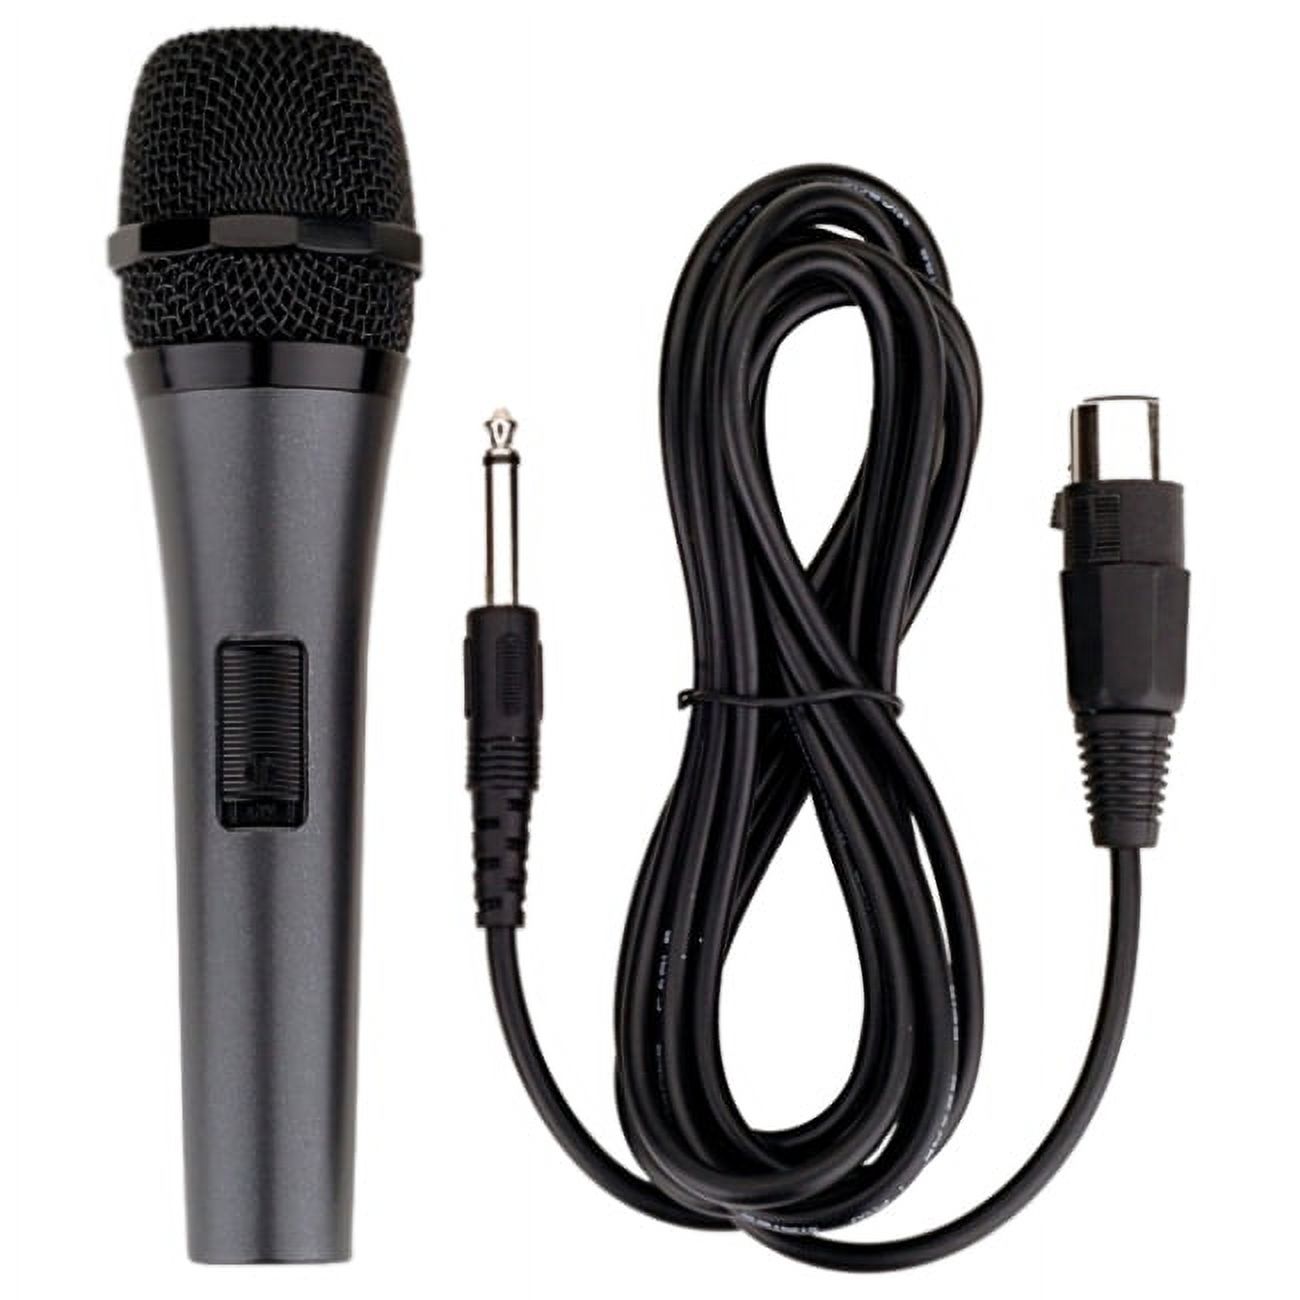 DOK Solutions - Emerson Professional Dynamic Microphone with Detachable Cord - image 2 of 3